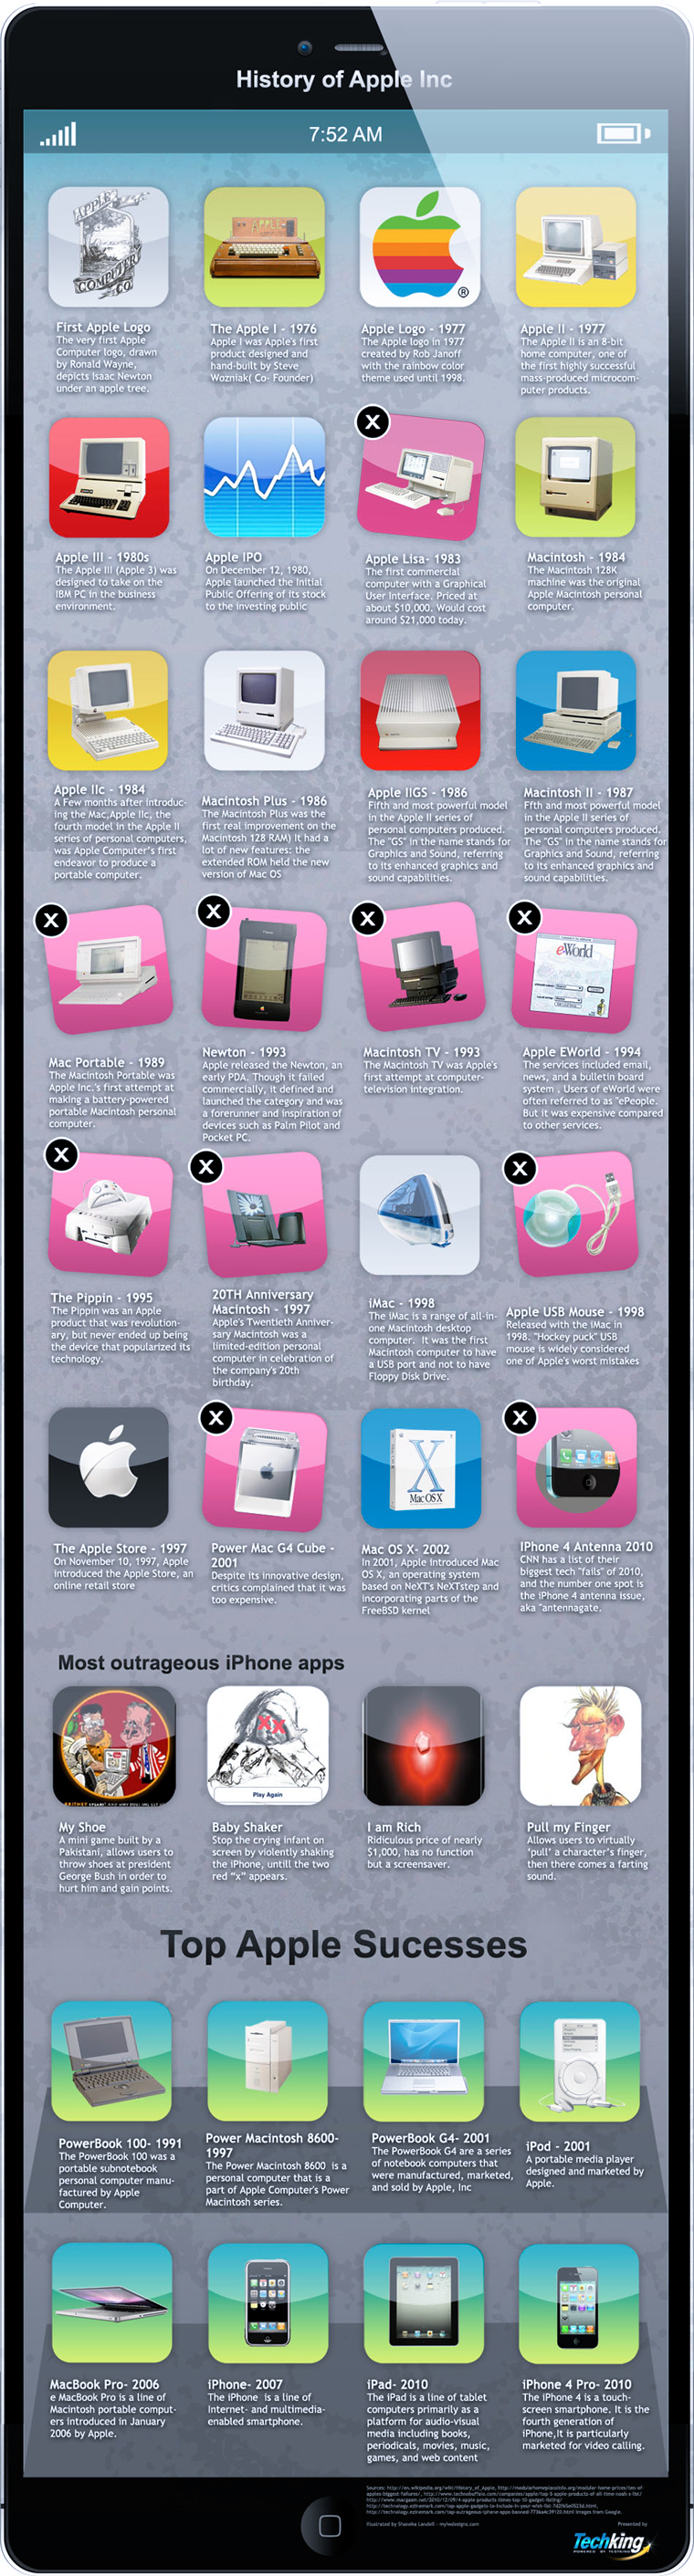 History of Apple, Inc.  - Infographic